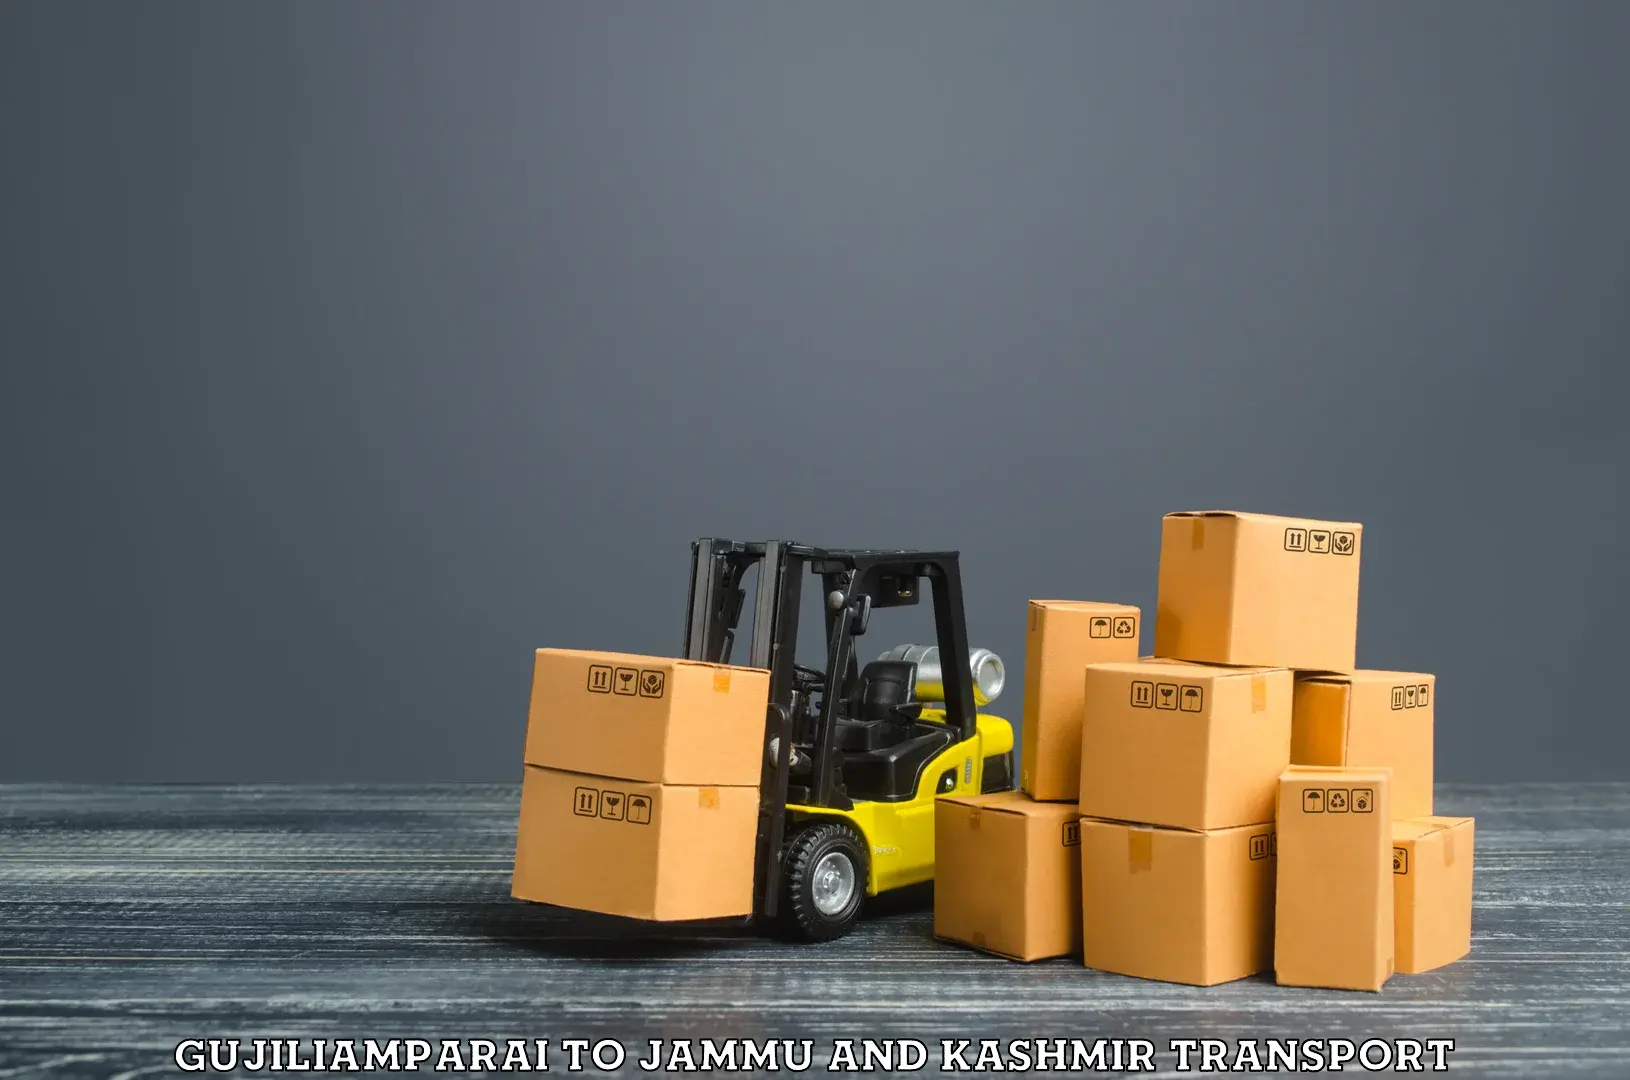 Goods delivery service Gujiliamparai to Jammu and Kashmir